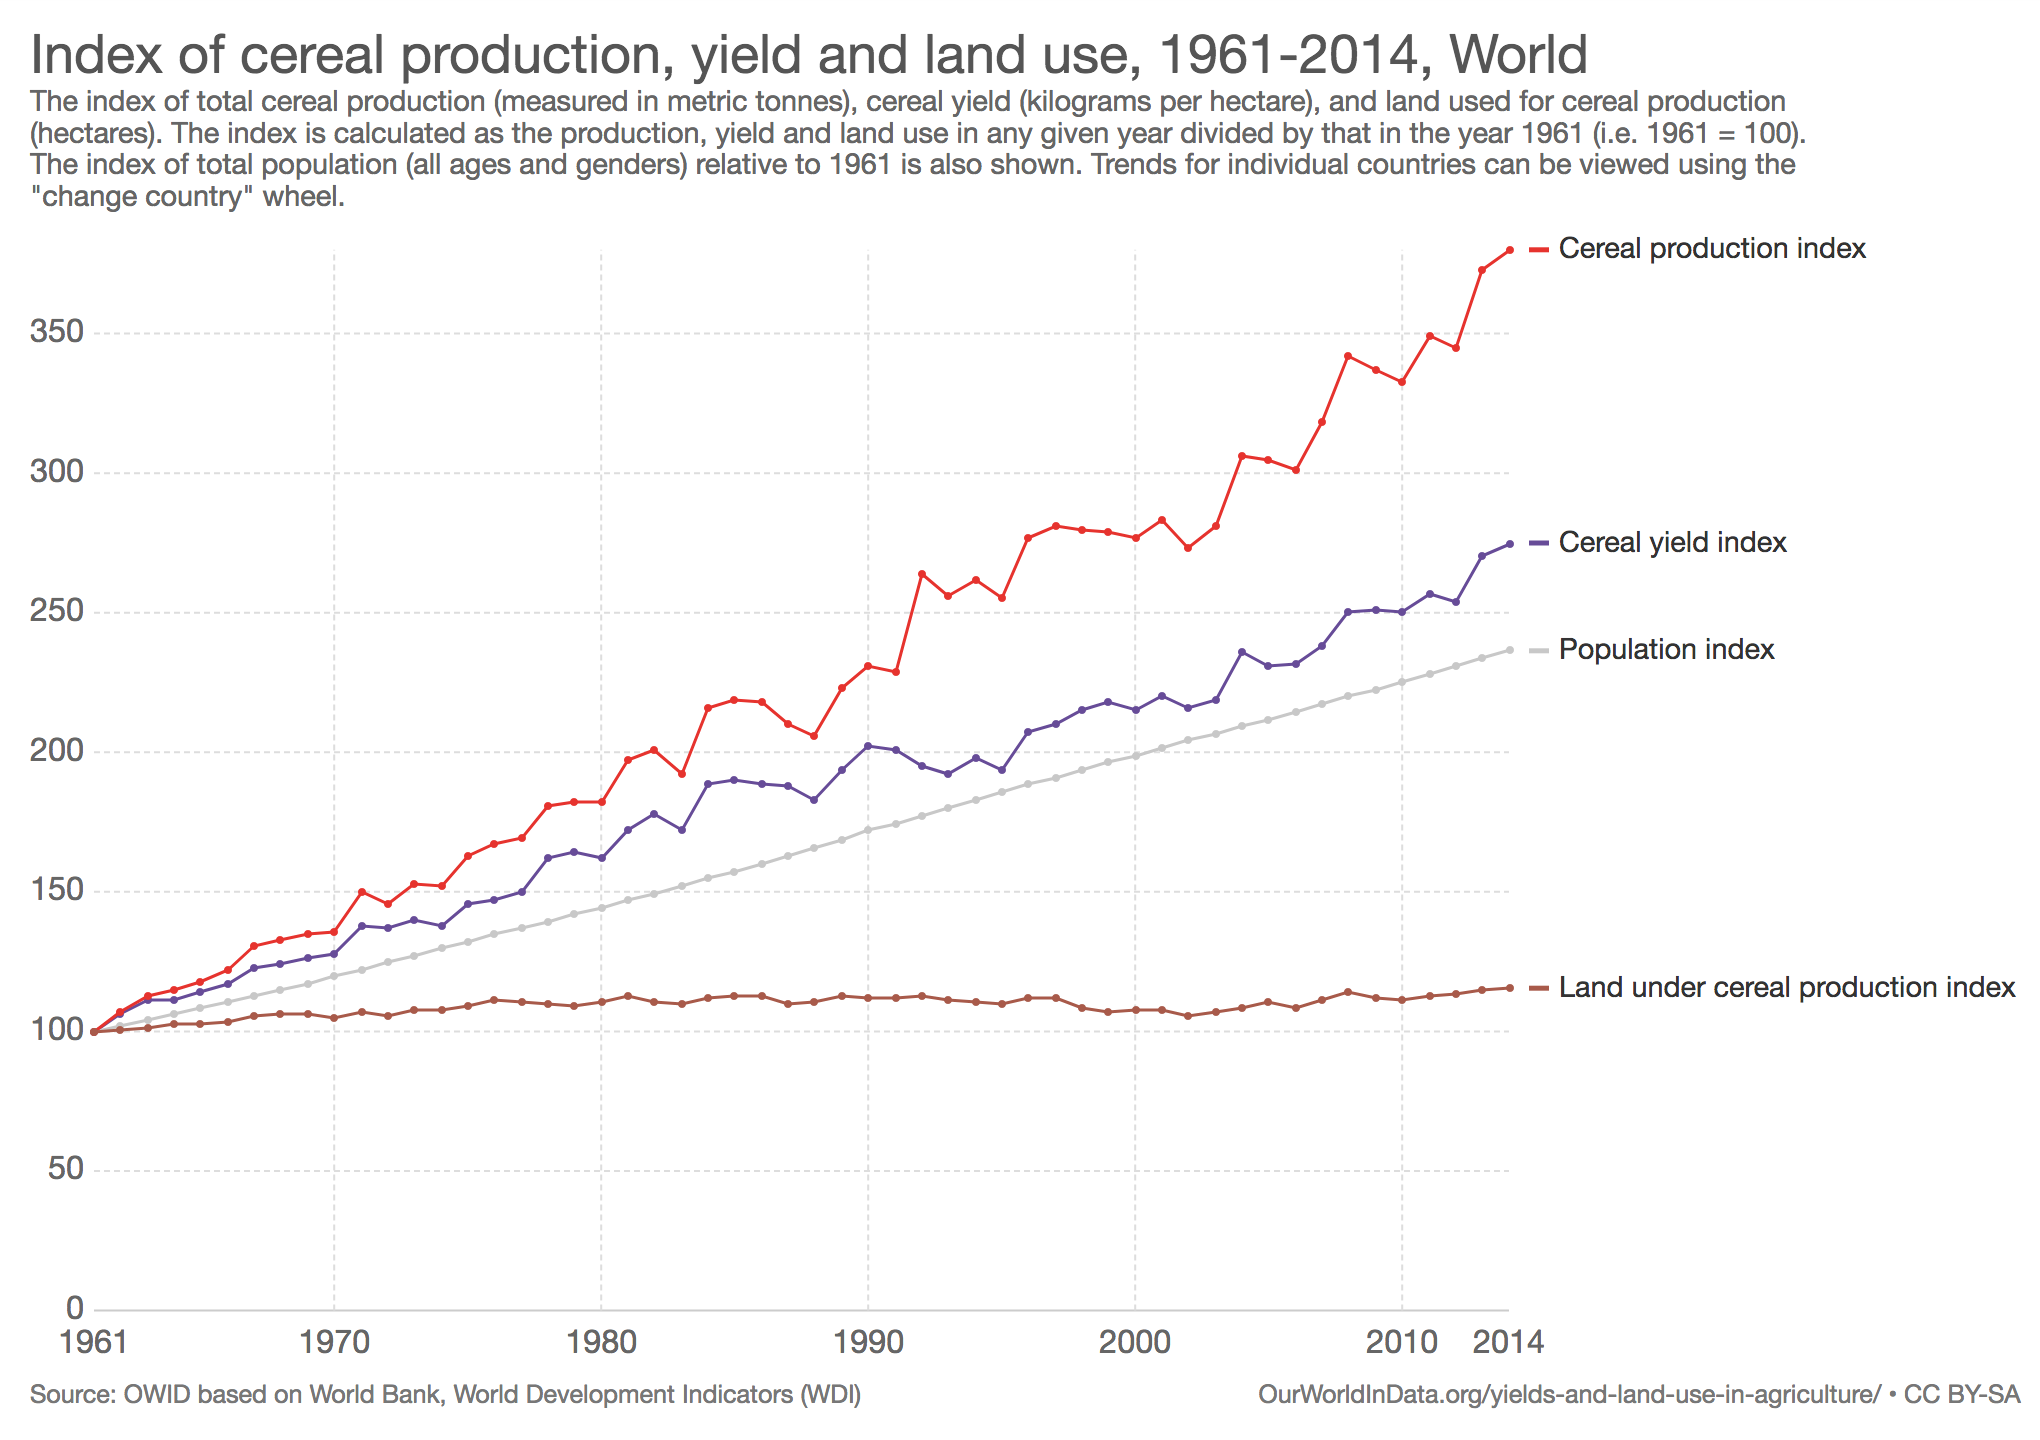 index-of-cereal-production-yield-and-land-use-1961-2014.png